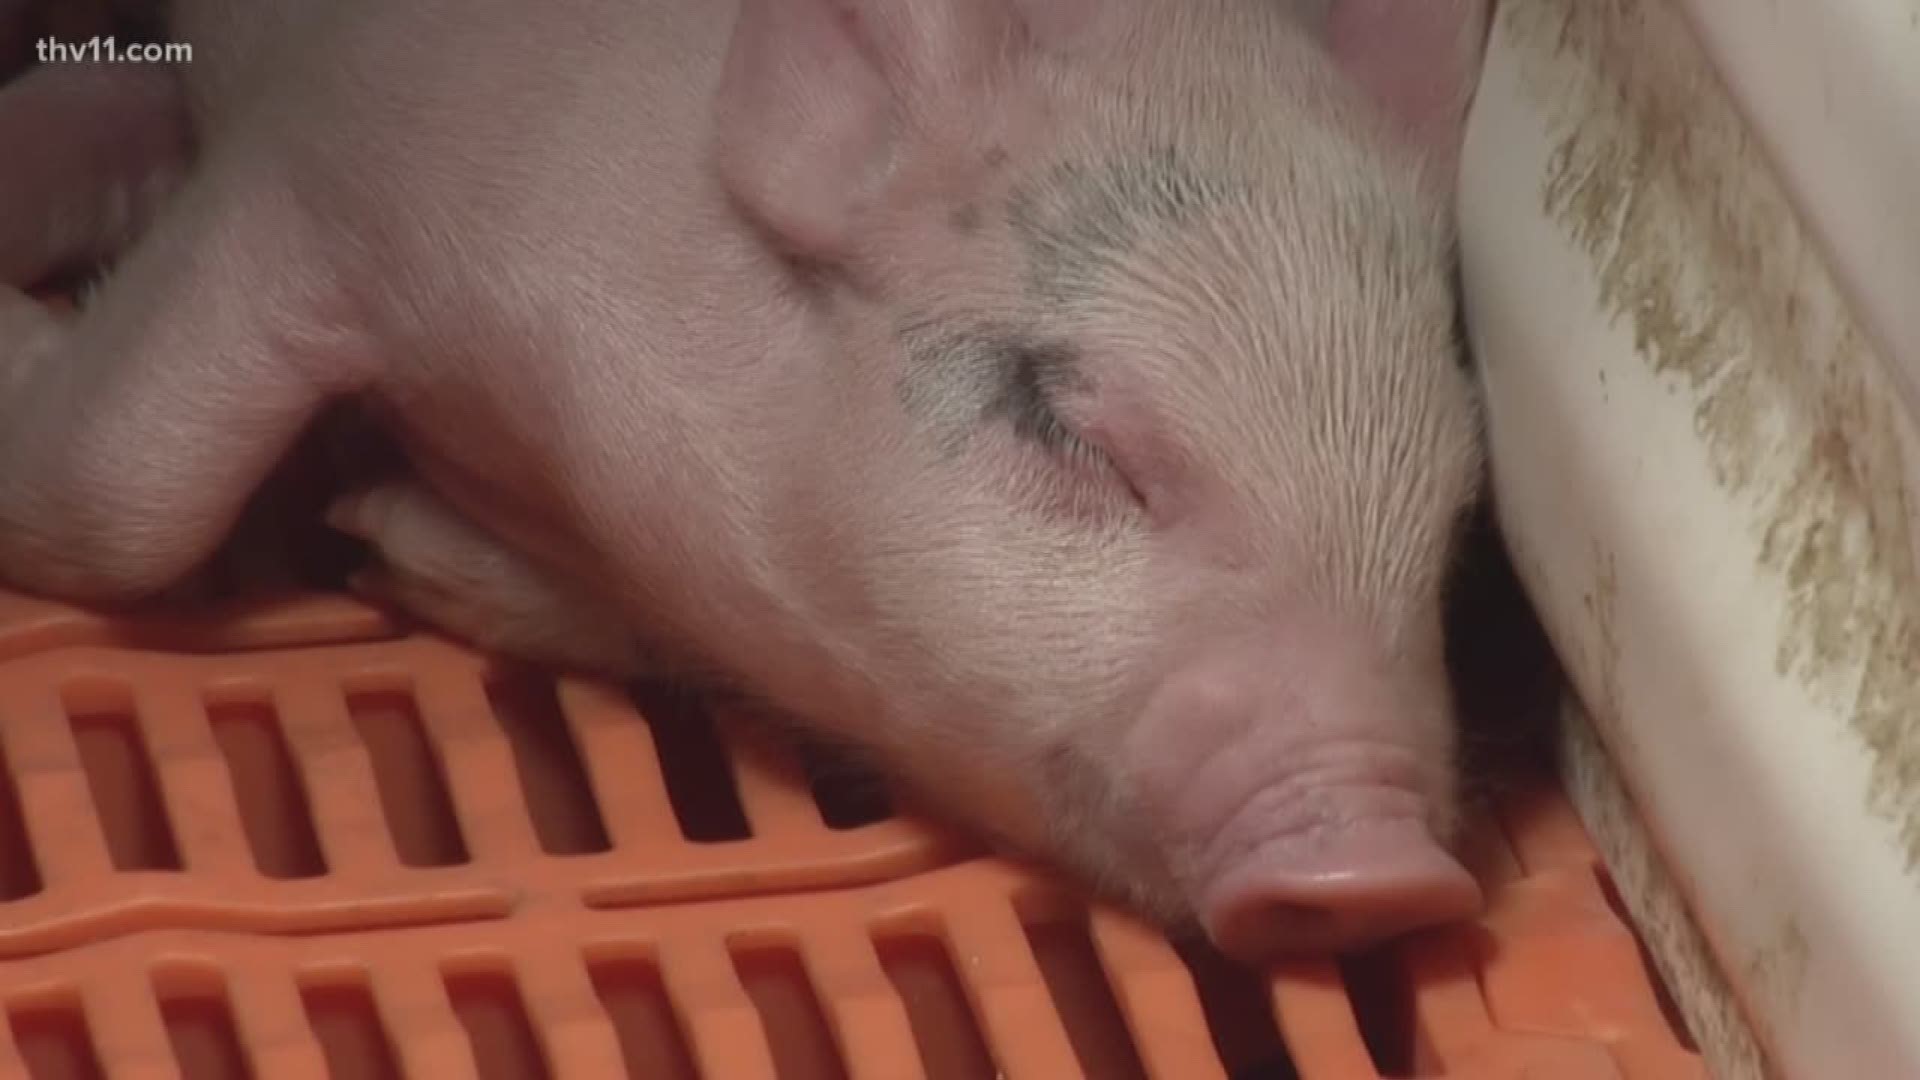 The state reaches an agreement with the owners of a large hog farm near the Buffalo River to shut down after two years of operations.